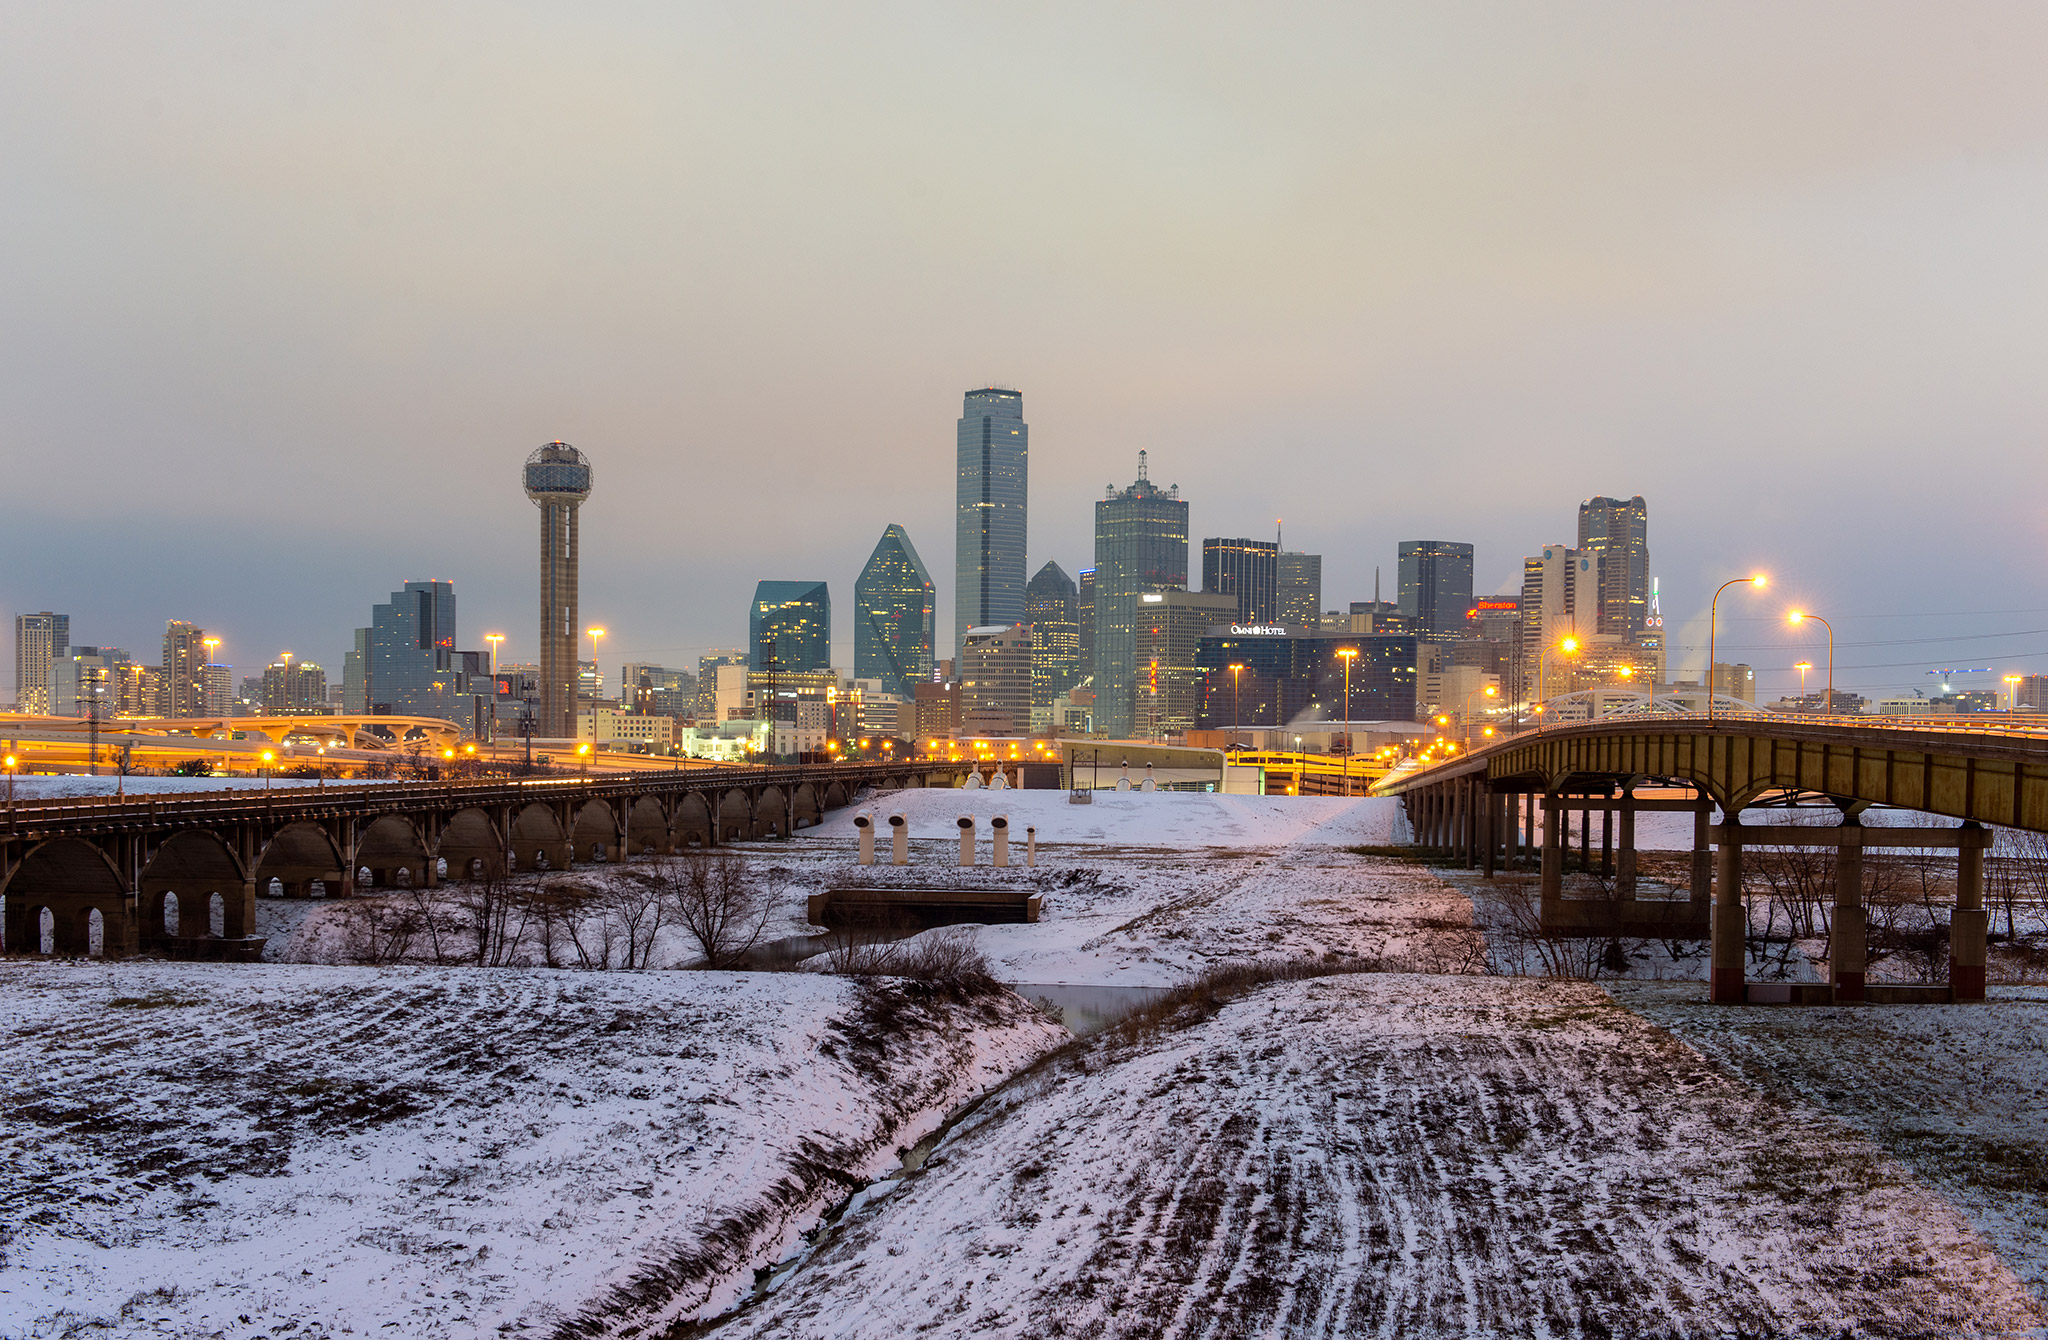 A City Under Snow, As Seen By Dallas Photographers. Central Track